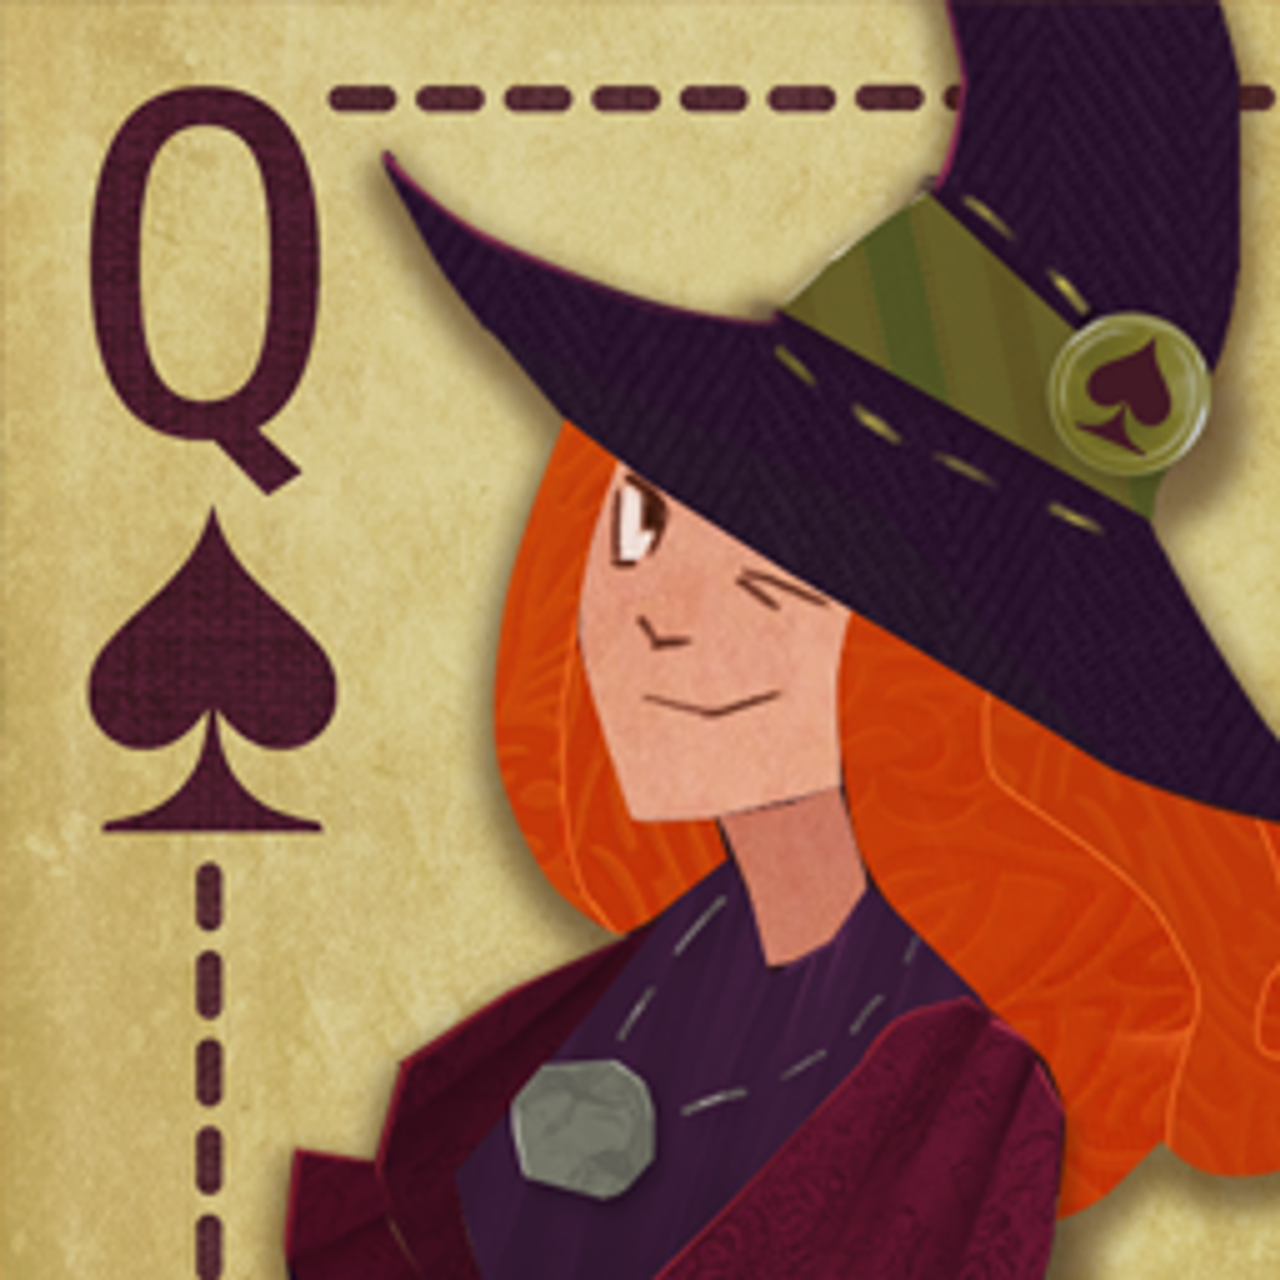 Solitaire Halloween Story